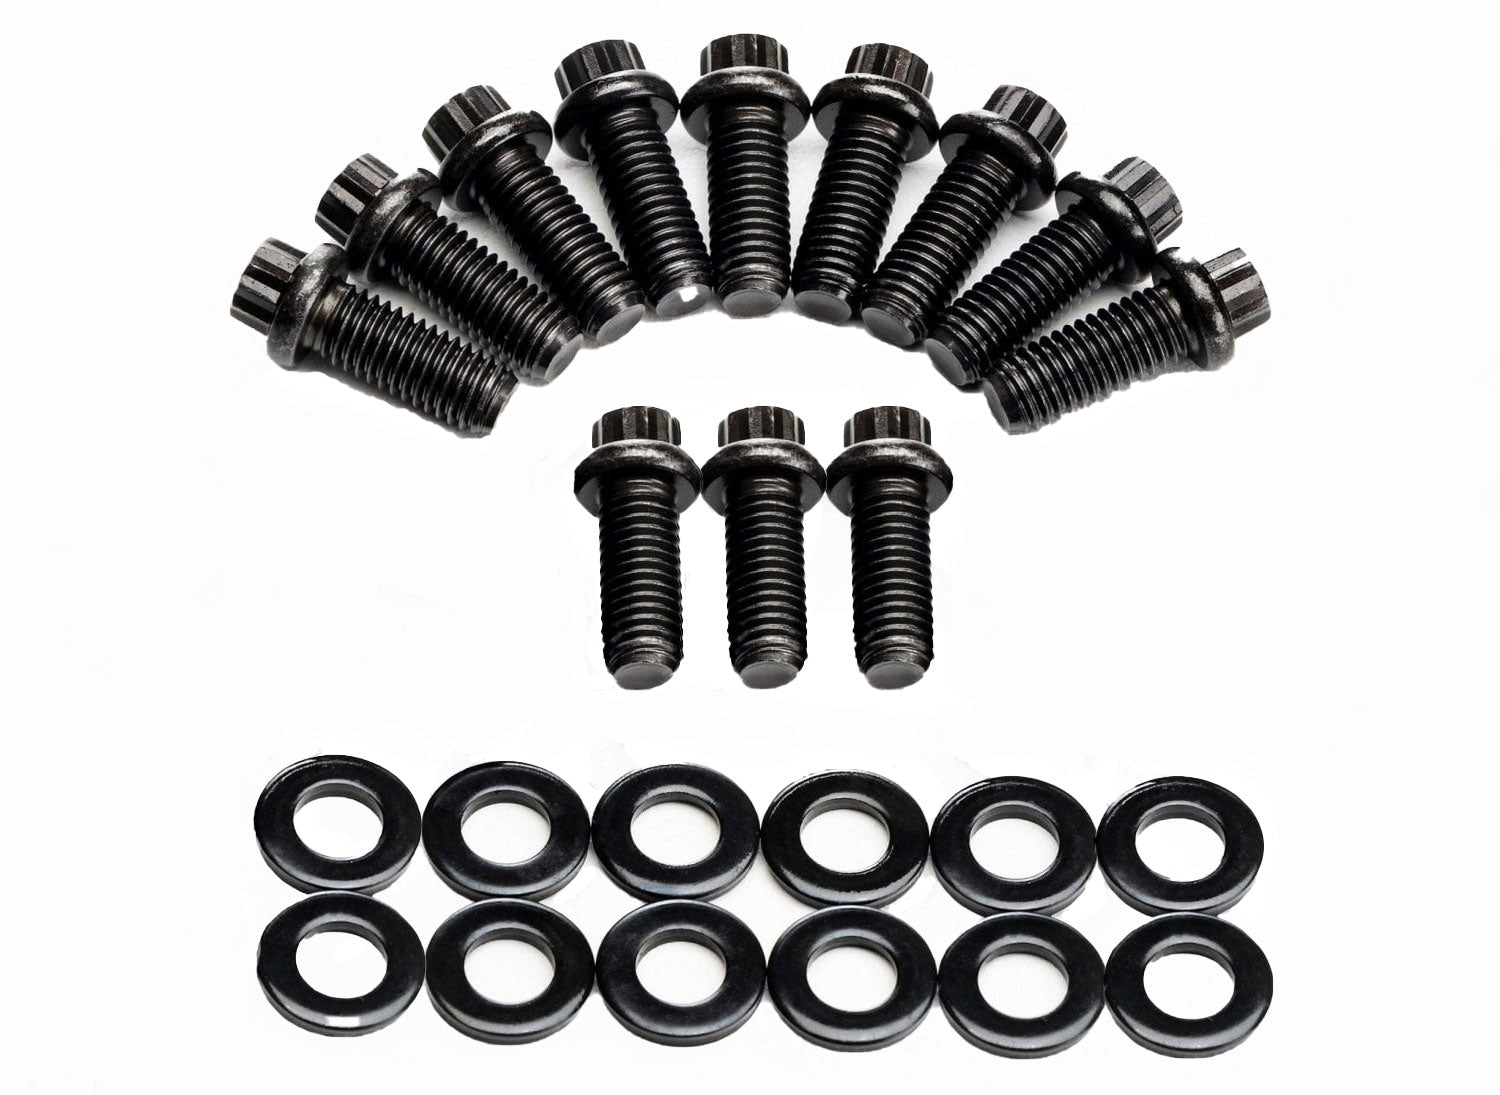 Clutch Cover & Pressure Plate bolts are essential for your LS-Nissan Frontier/Xterra conversion